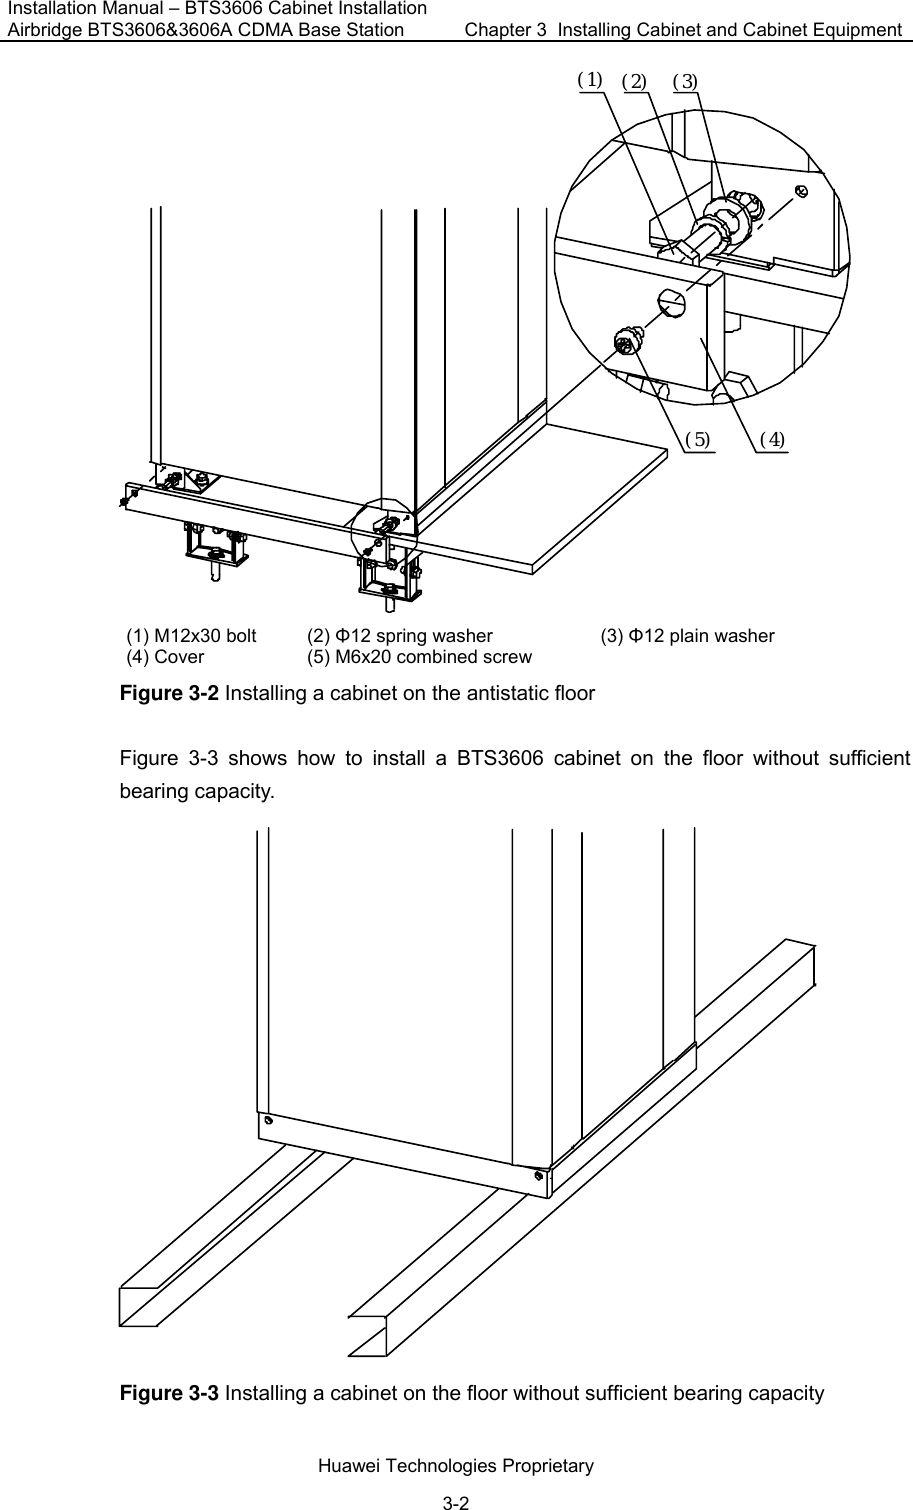 Installation Manual – BTS3606 Cabinet Installation Airbridge BTS3606&amp;3606A CDMA Base Station  Chapter 3  Installing Cabinet and Cabinet Equipment  Huawei Technologies Proprietary 3-2 (1) (2) (3)(4)(5) (1) M12x30 bolt  (2) Φ12 spring washer  (3) Φ12 plain washer (4) Cover  (5) M6x20 combined screw   Figure 3-2 Installing a cabinet on the antistatic floor Figure 3-3 shows how to install a BTS3606 cabinet on the floor without sufficient bearing capacity.  Figure 3-3 Installing a cabinet on the floor without sufficient bearing capacity 